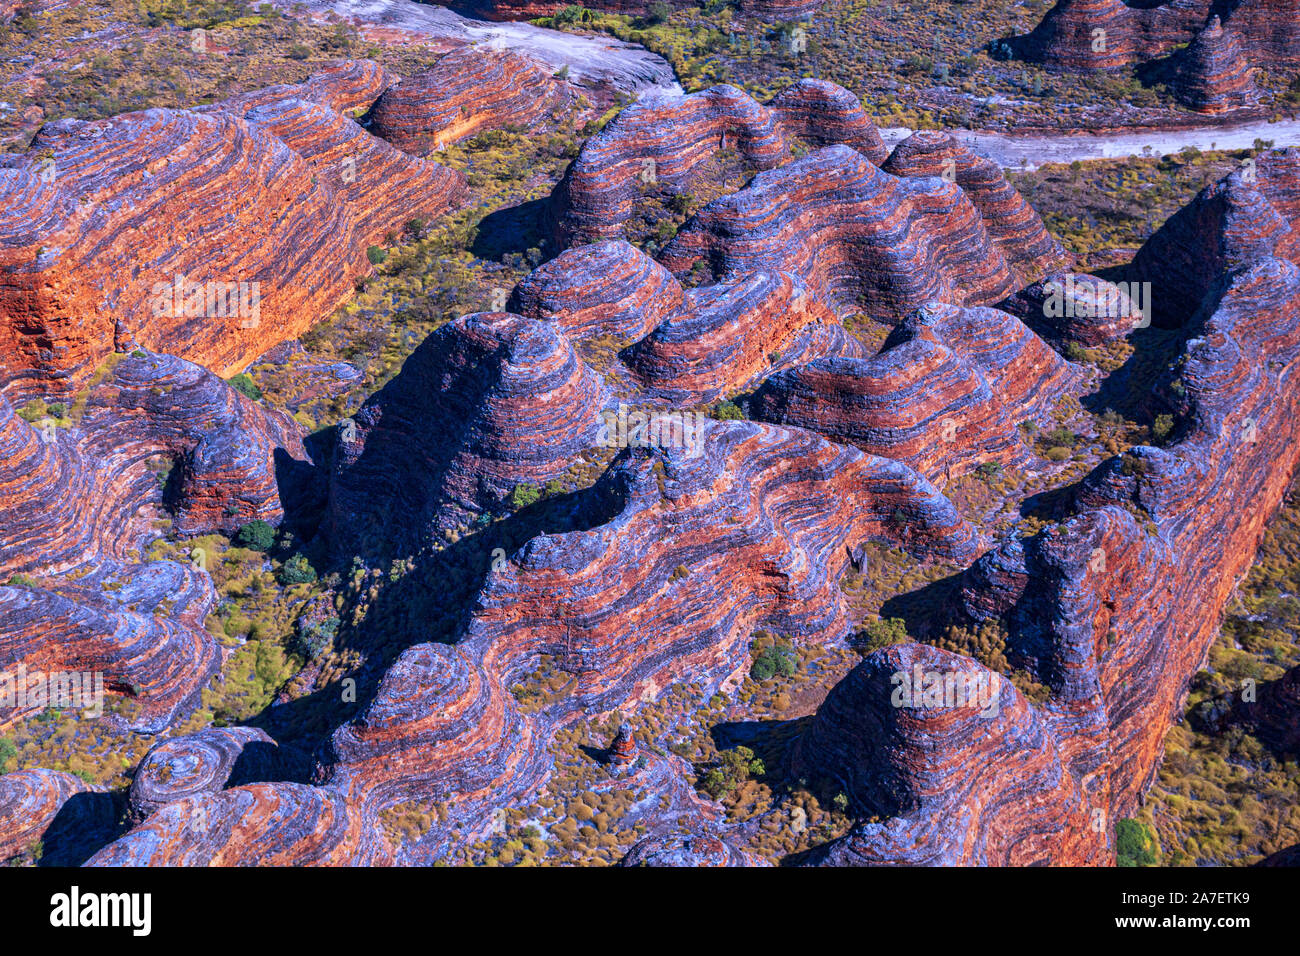 Aerial view of the beehive like  colourful sandstone formations of the Bungle Bungles, Purnululu National Park, Kimberley, Australia Stock Photo